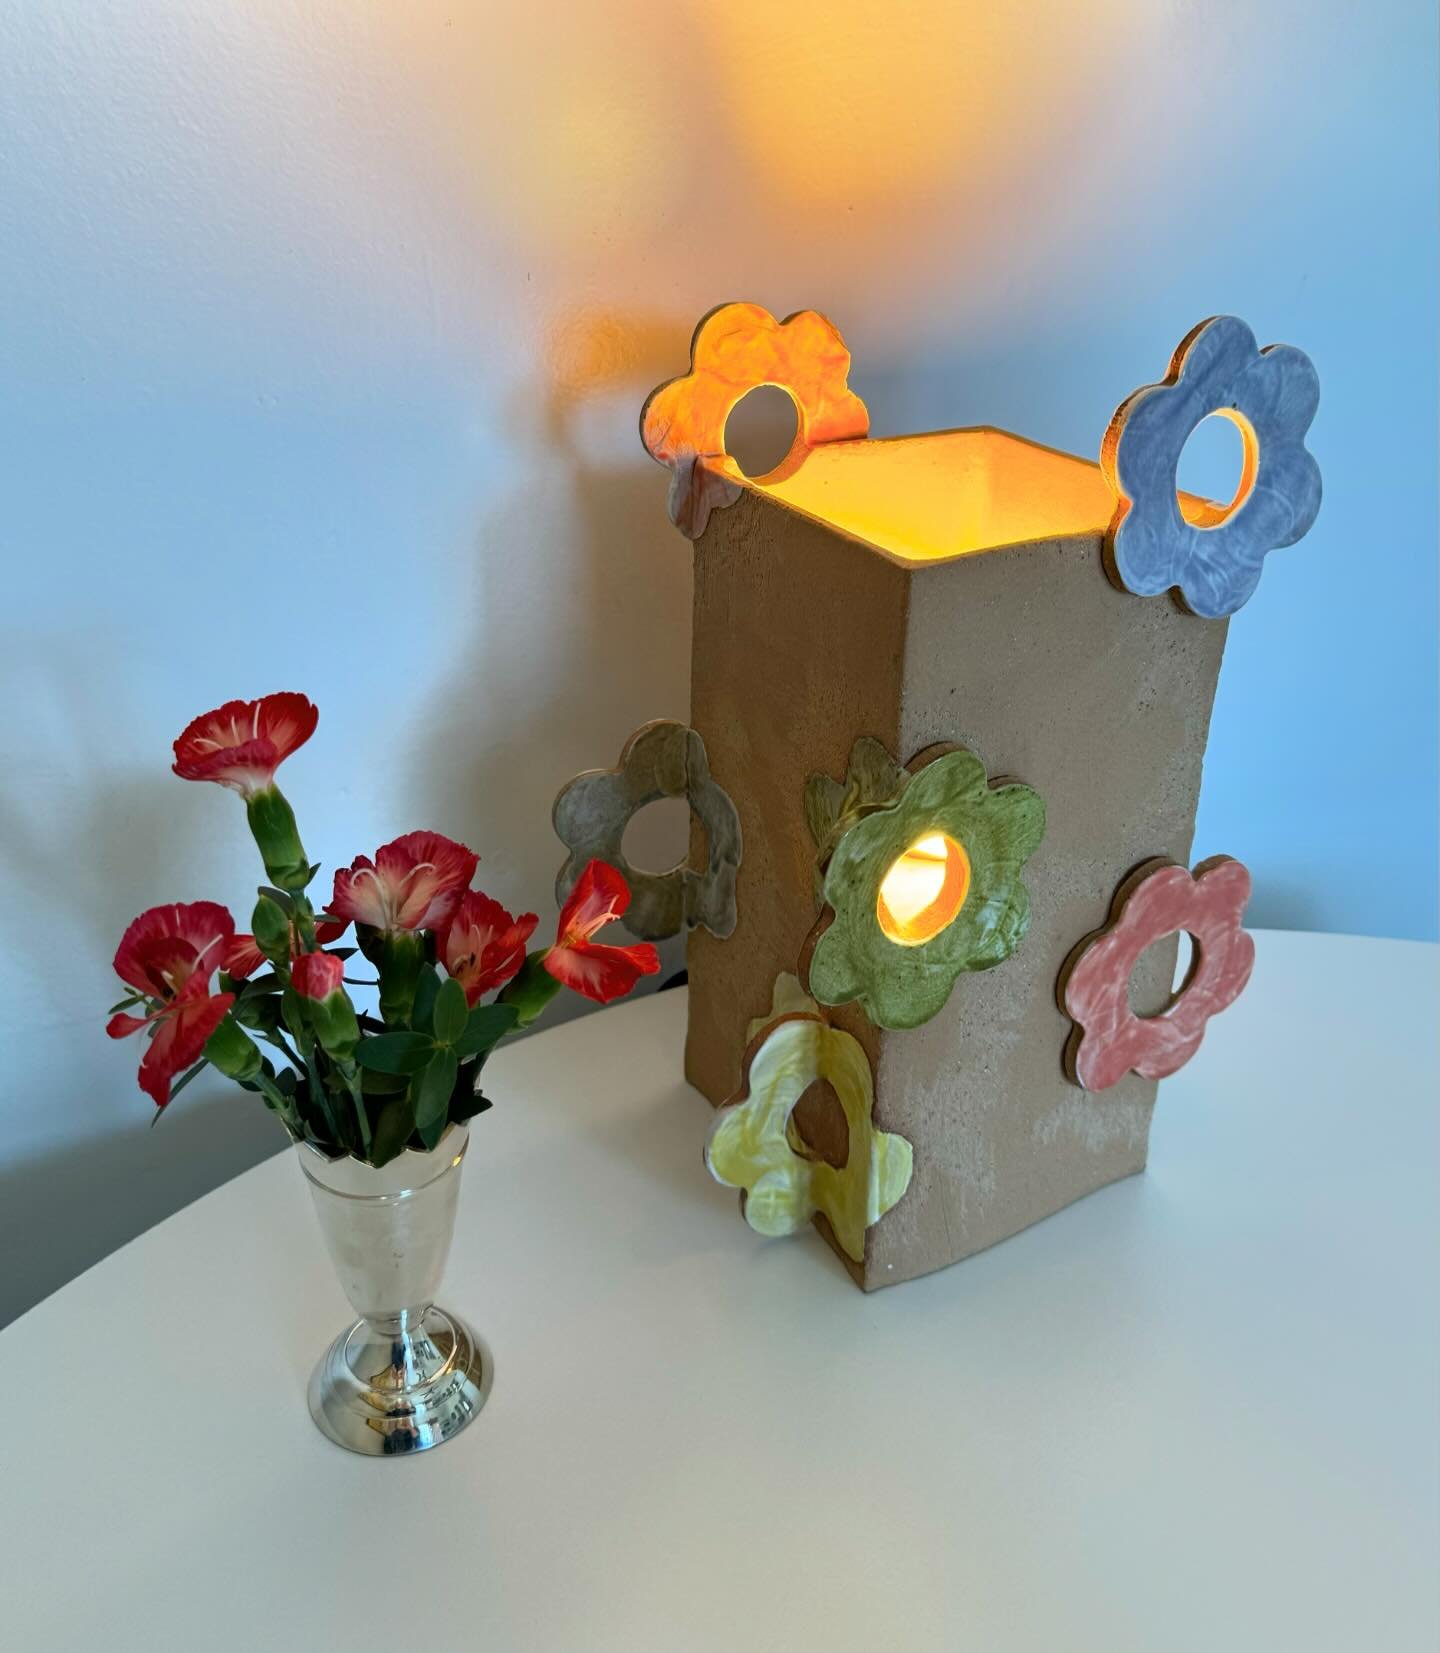 Brighten your day by signing up for our Hand-Building Lamp Workshop from 5/21-6/4 🤍 Make yourself a custom, one-of-a-kind accent lamp for your space and learn valuable hand-building techniques along the way! 

Sign up here 👉 https://www.costamesace